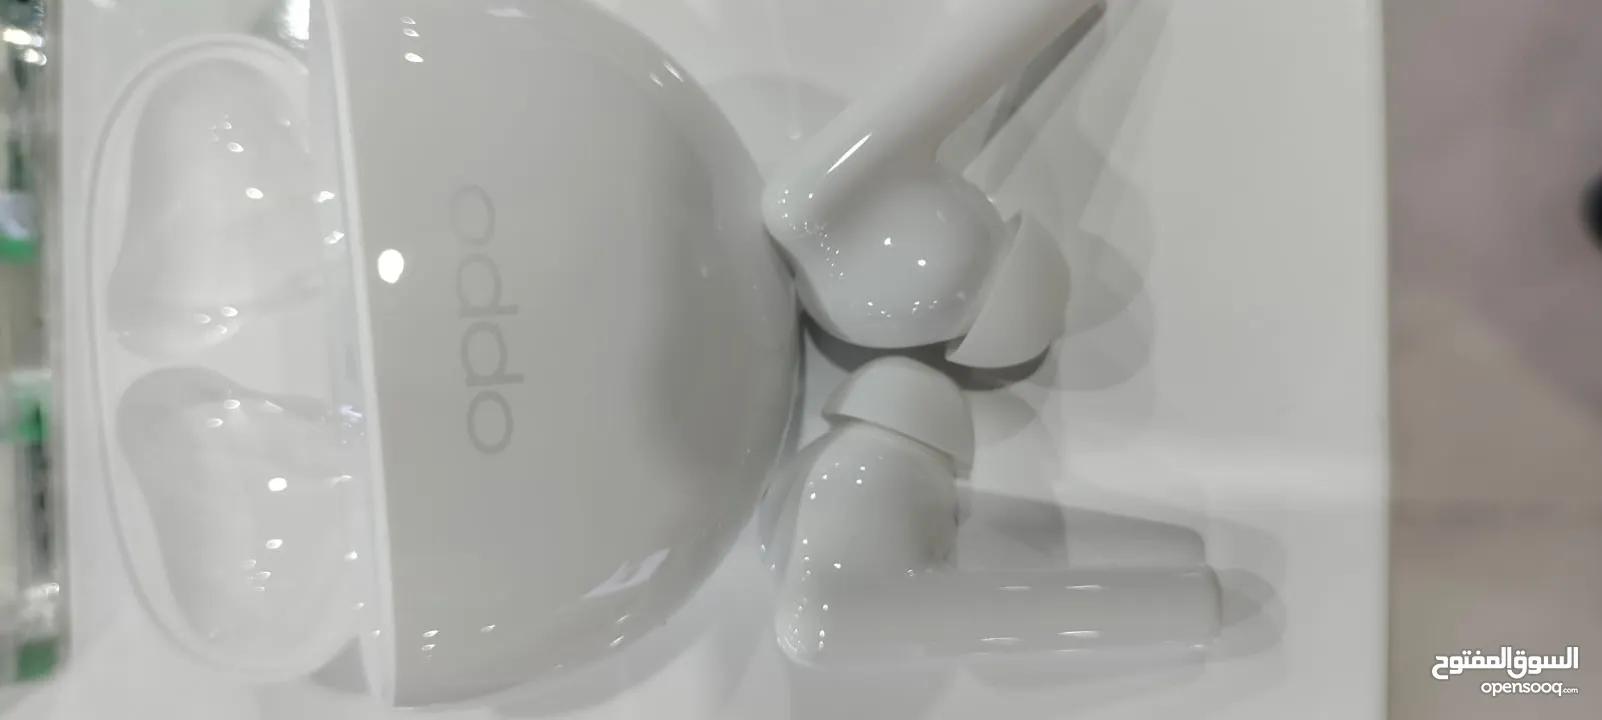 air buds oppo